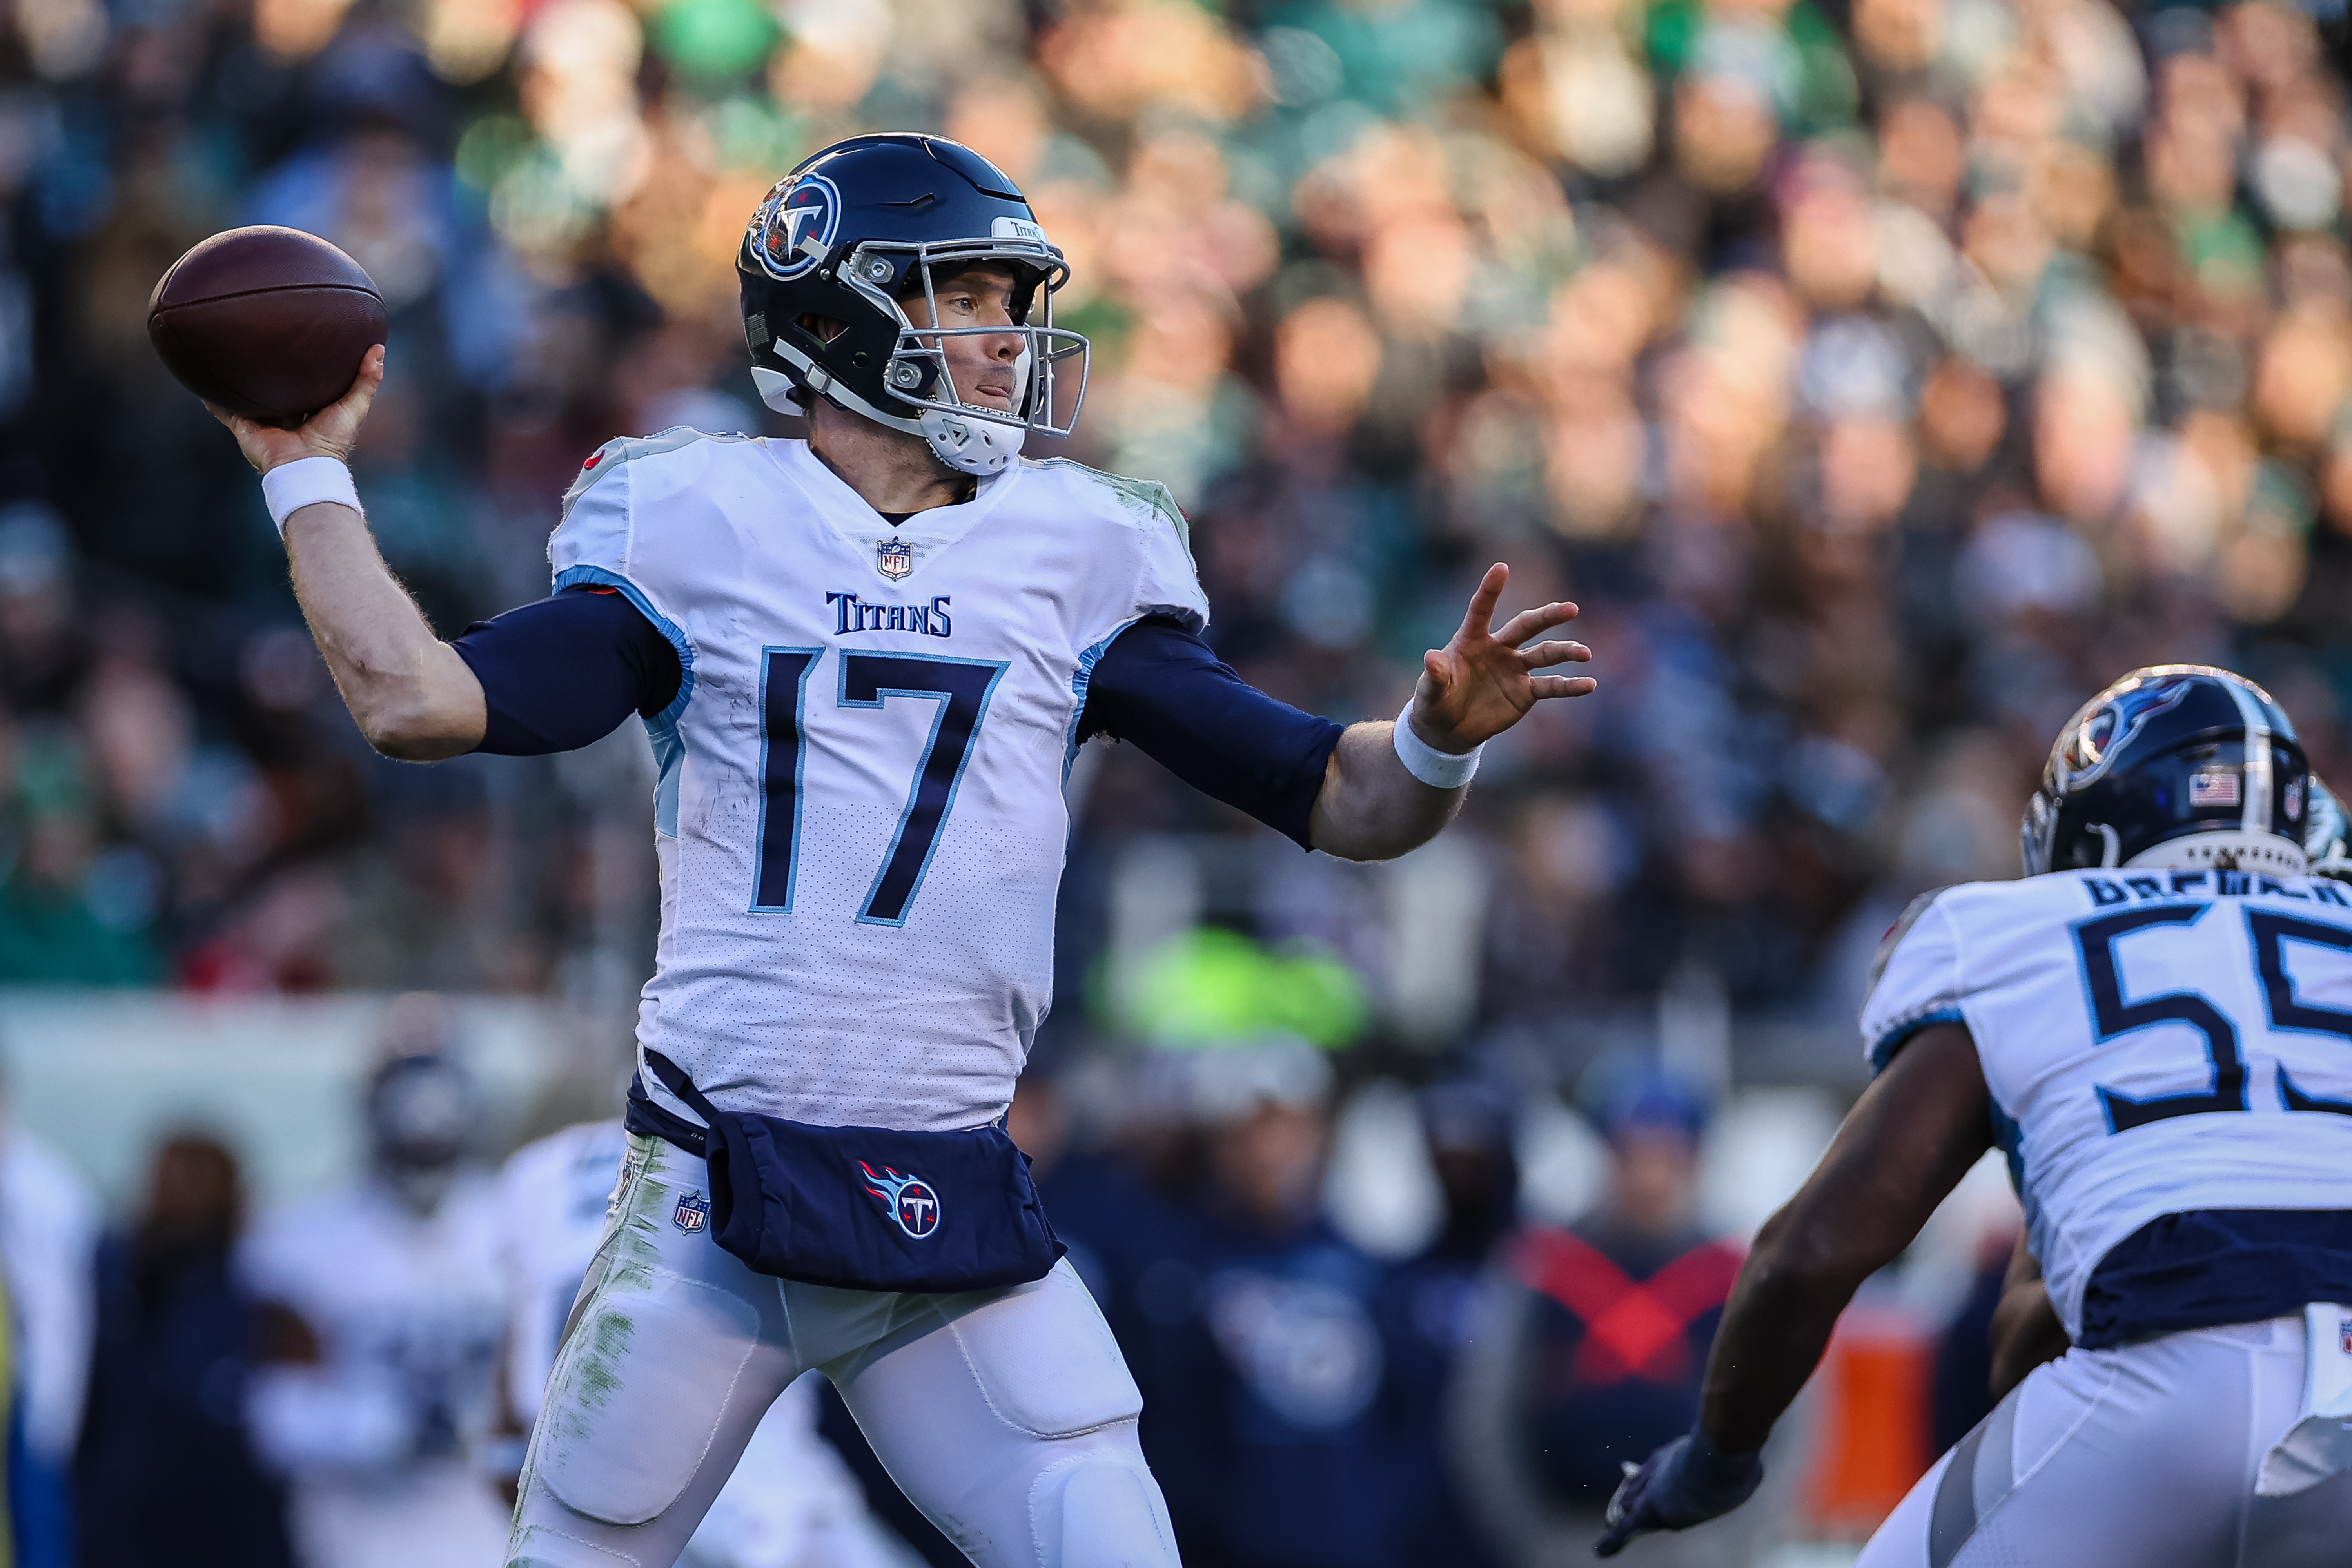 Ryan Tannehill #17 of the Tennessee Titans attempts a pass against the Philadelphia Eagles during the second half at Lincoln Financial Field on December 4, 2022 in Philadelphia, Pennsylvania.